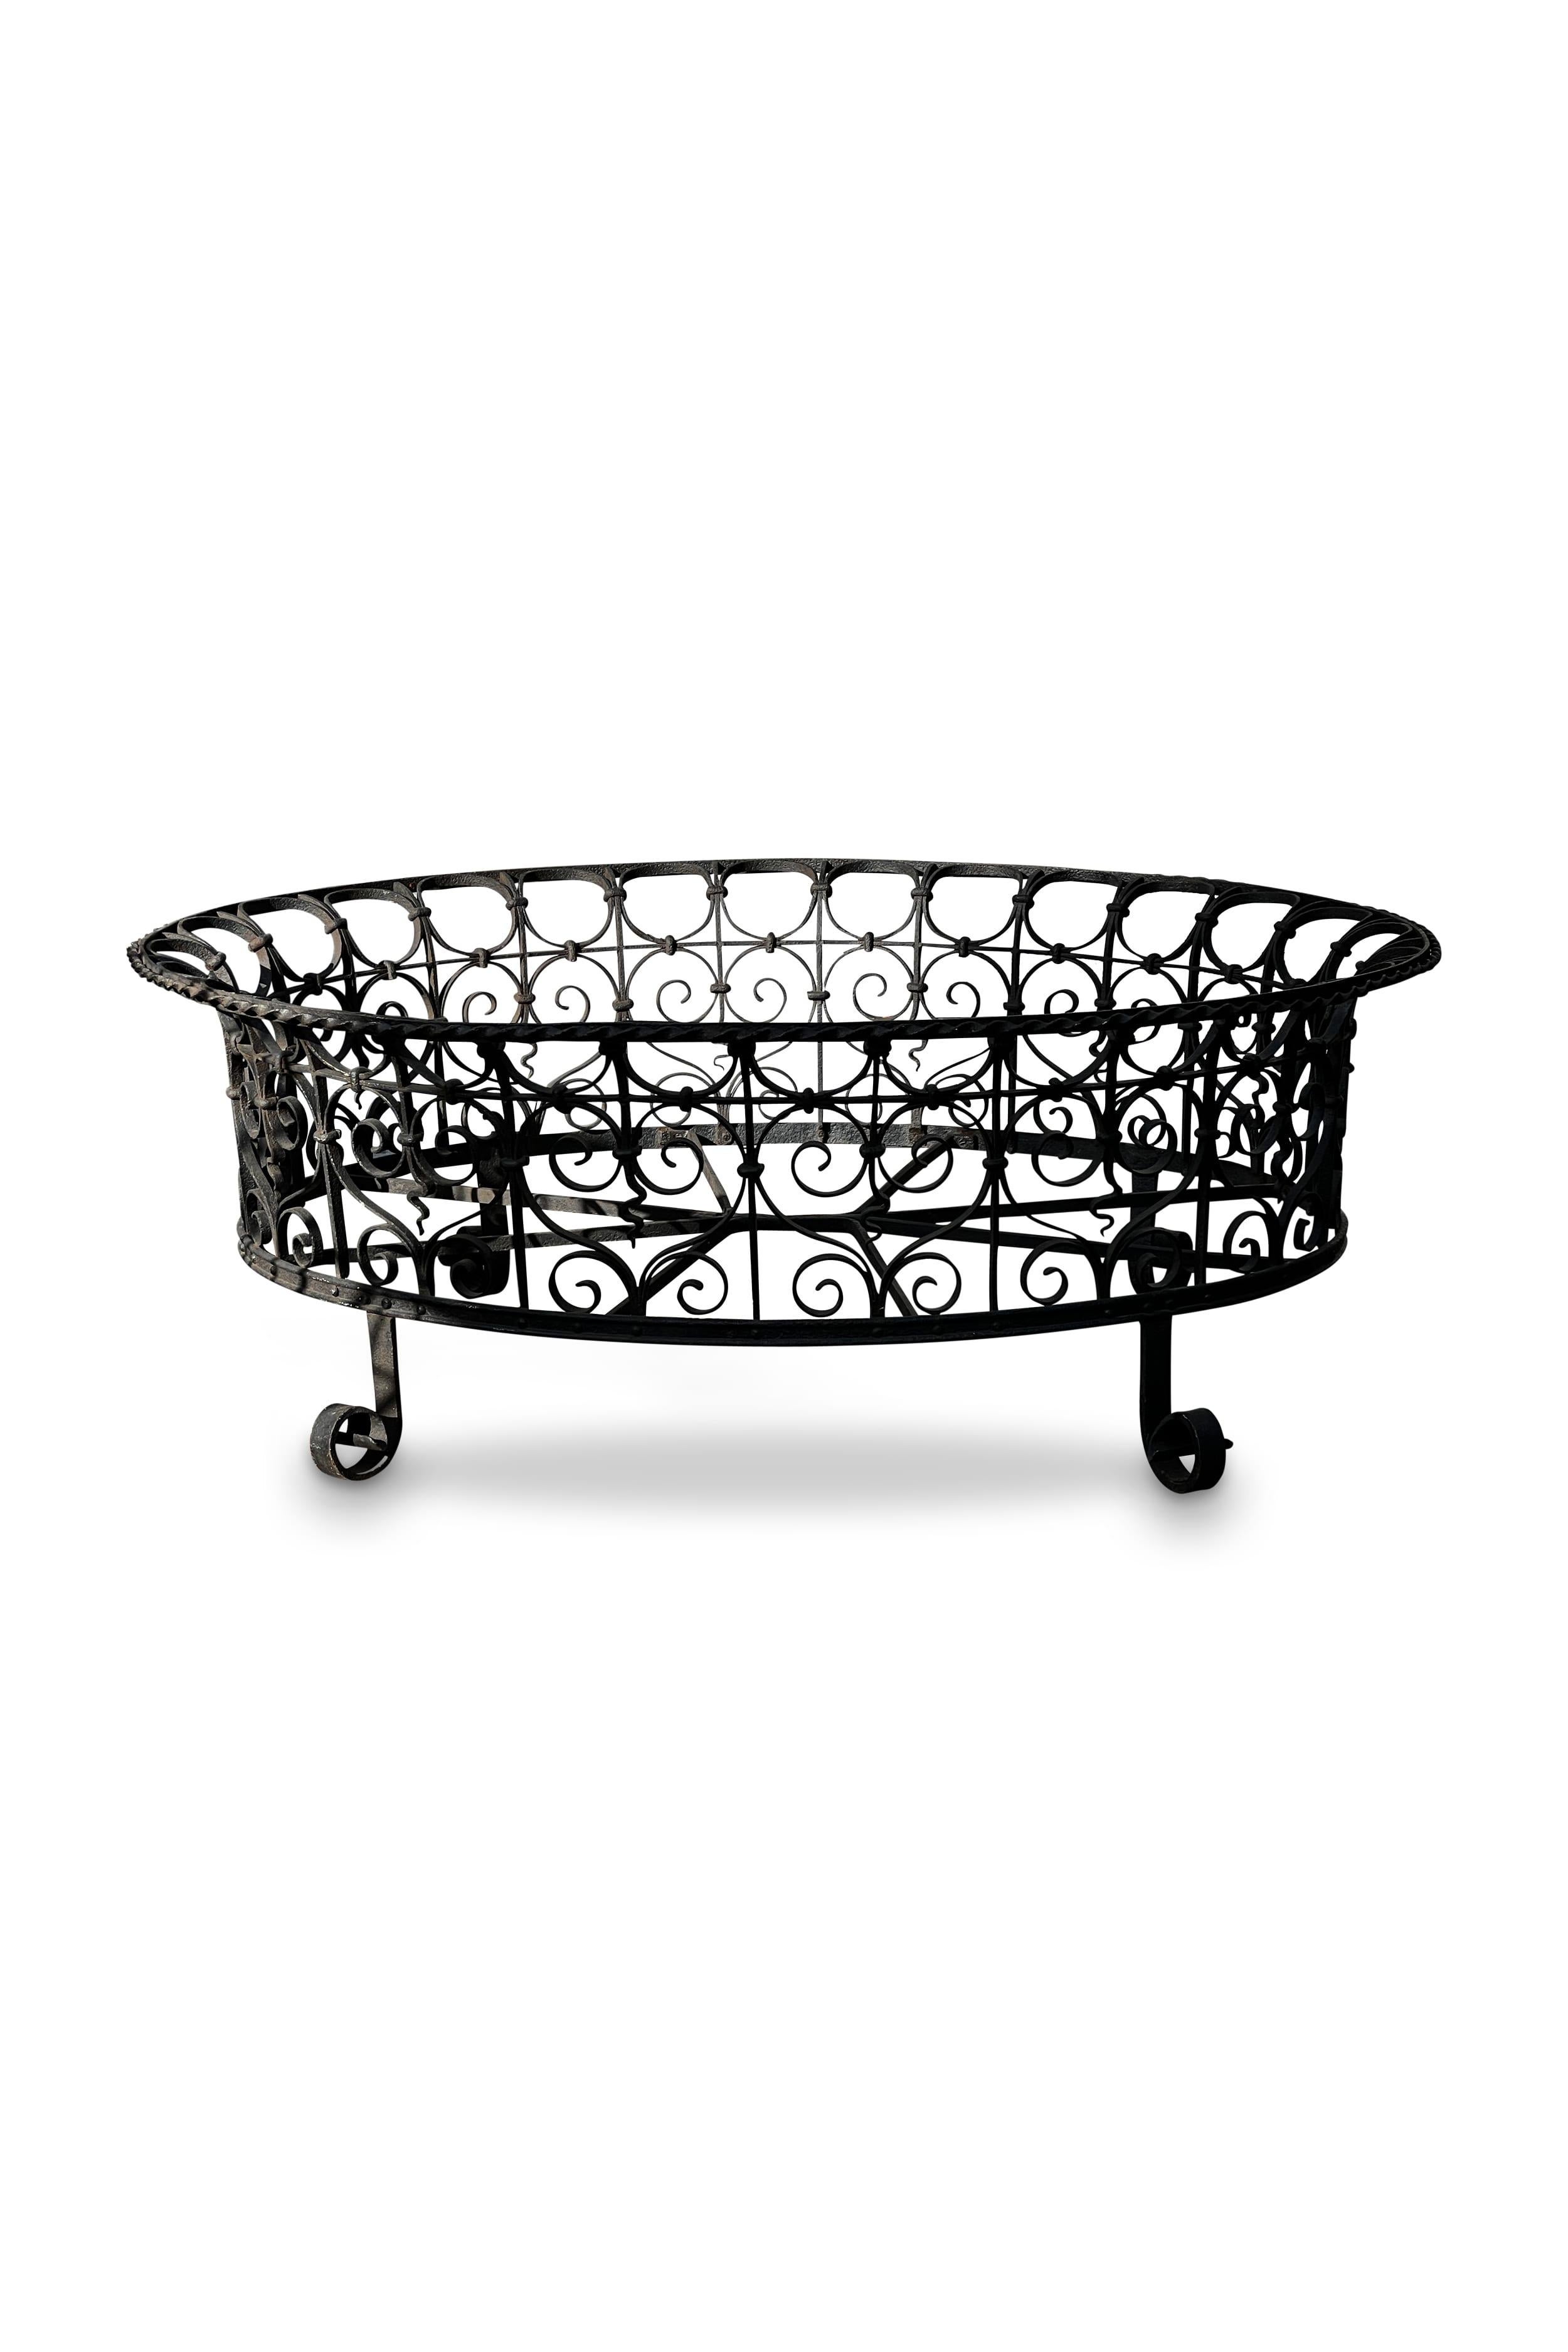 Unknown Victorian Antique Oval Wrought Iron Plant Holder For Sale